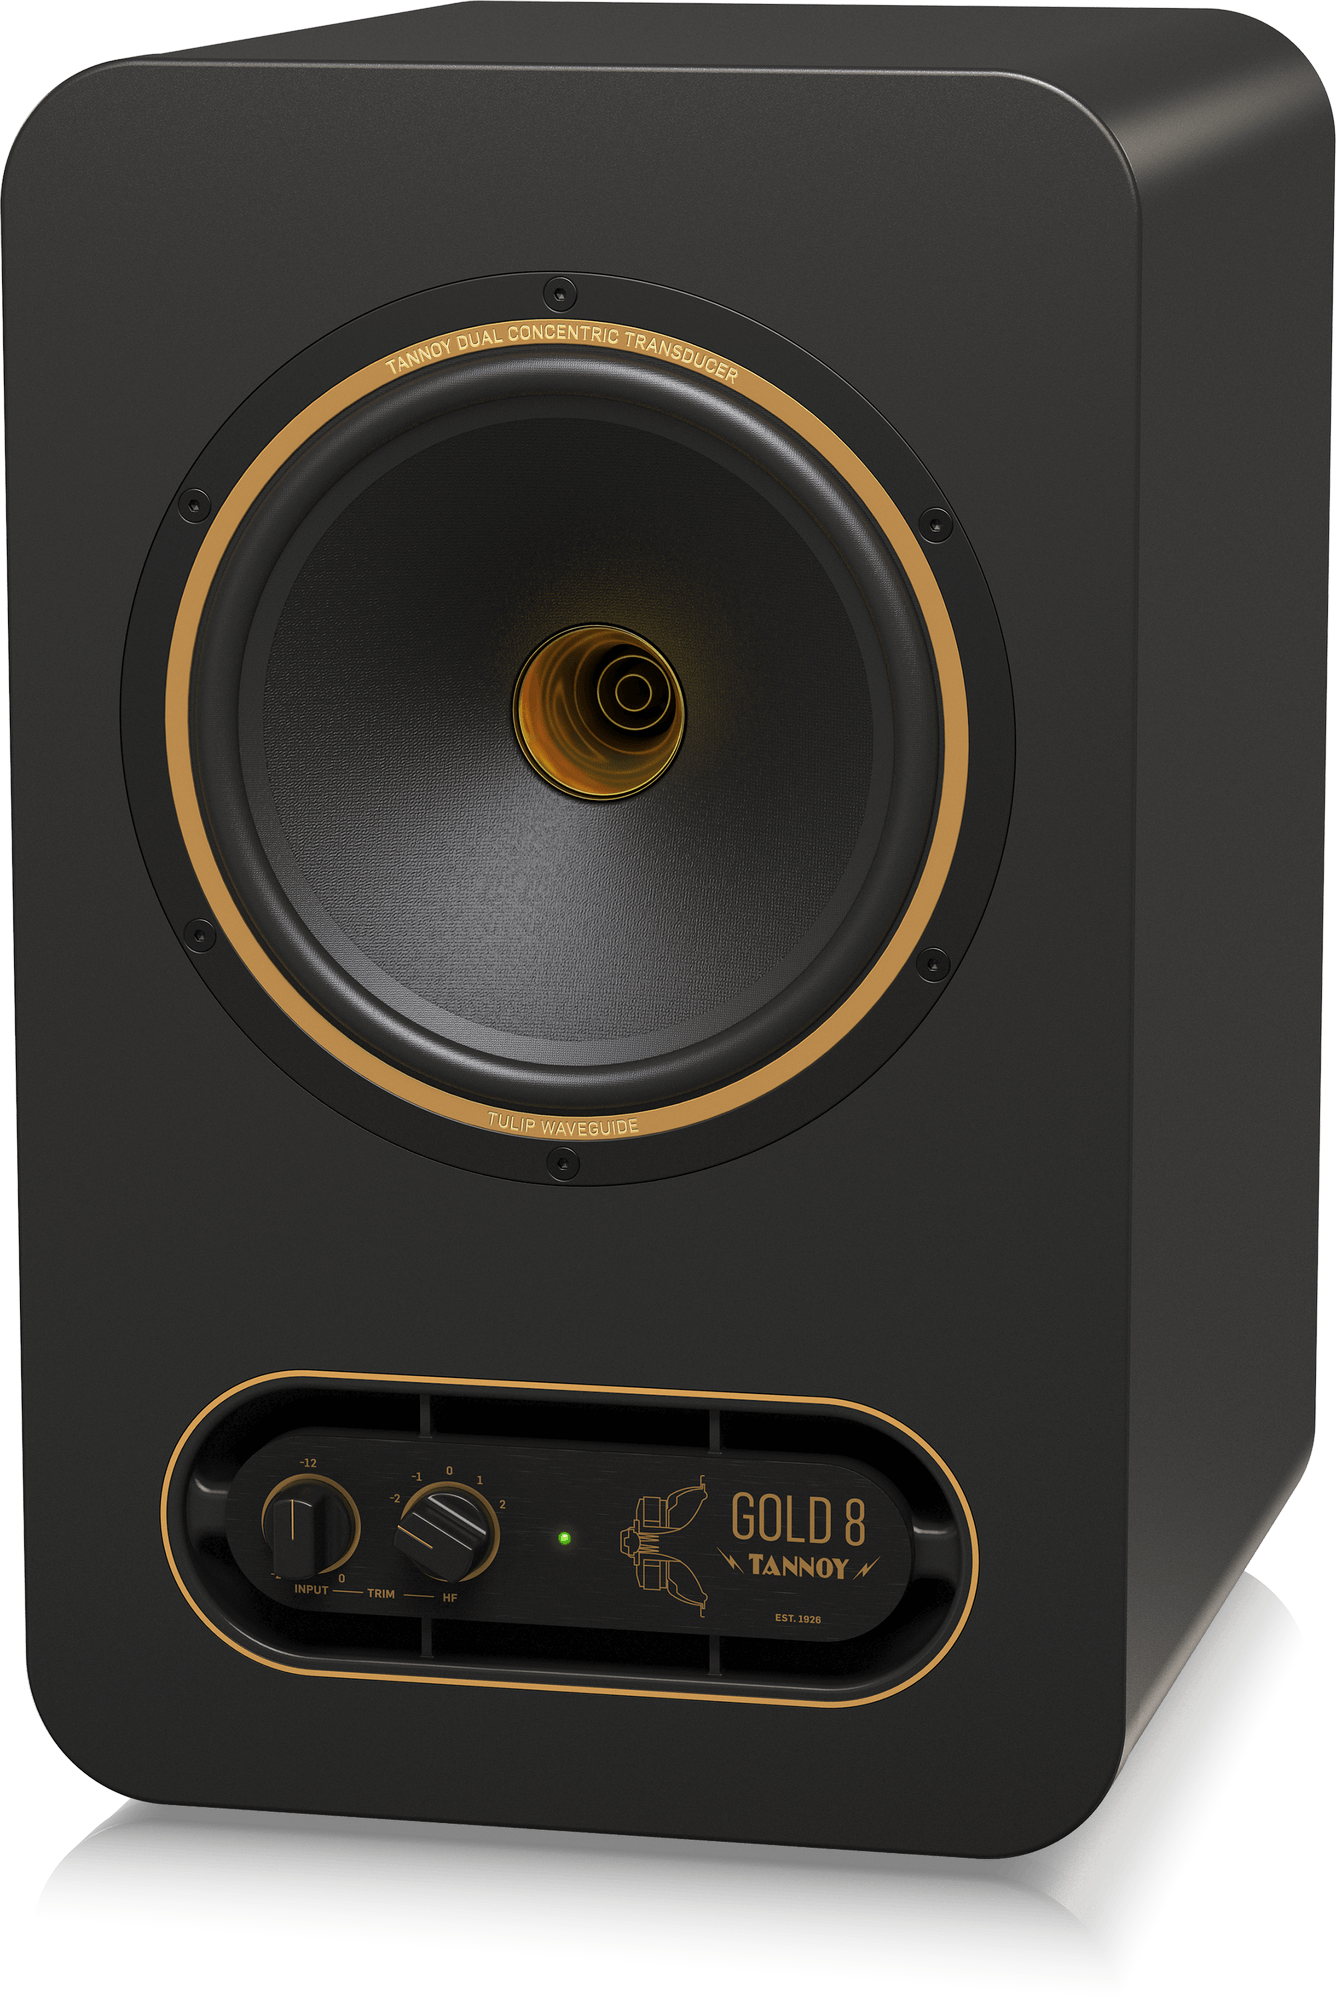 Tannoy | Product | GOLD 8